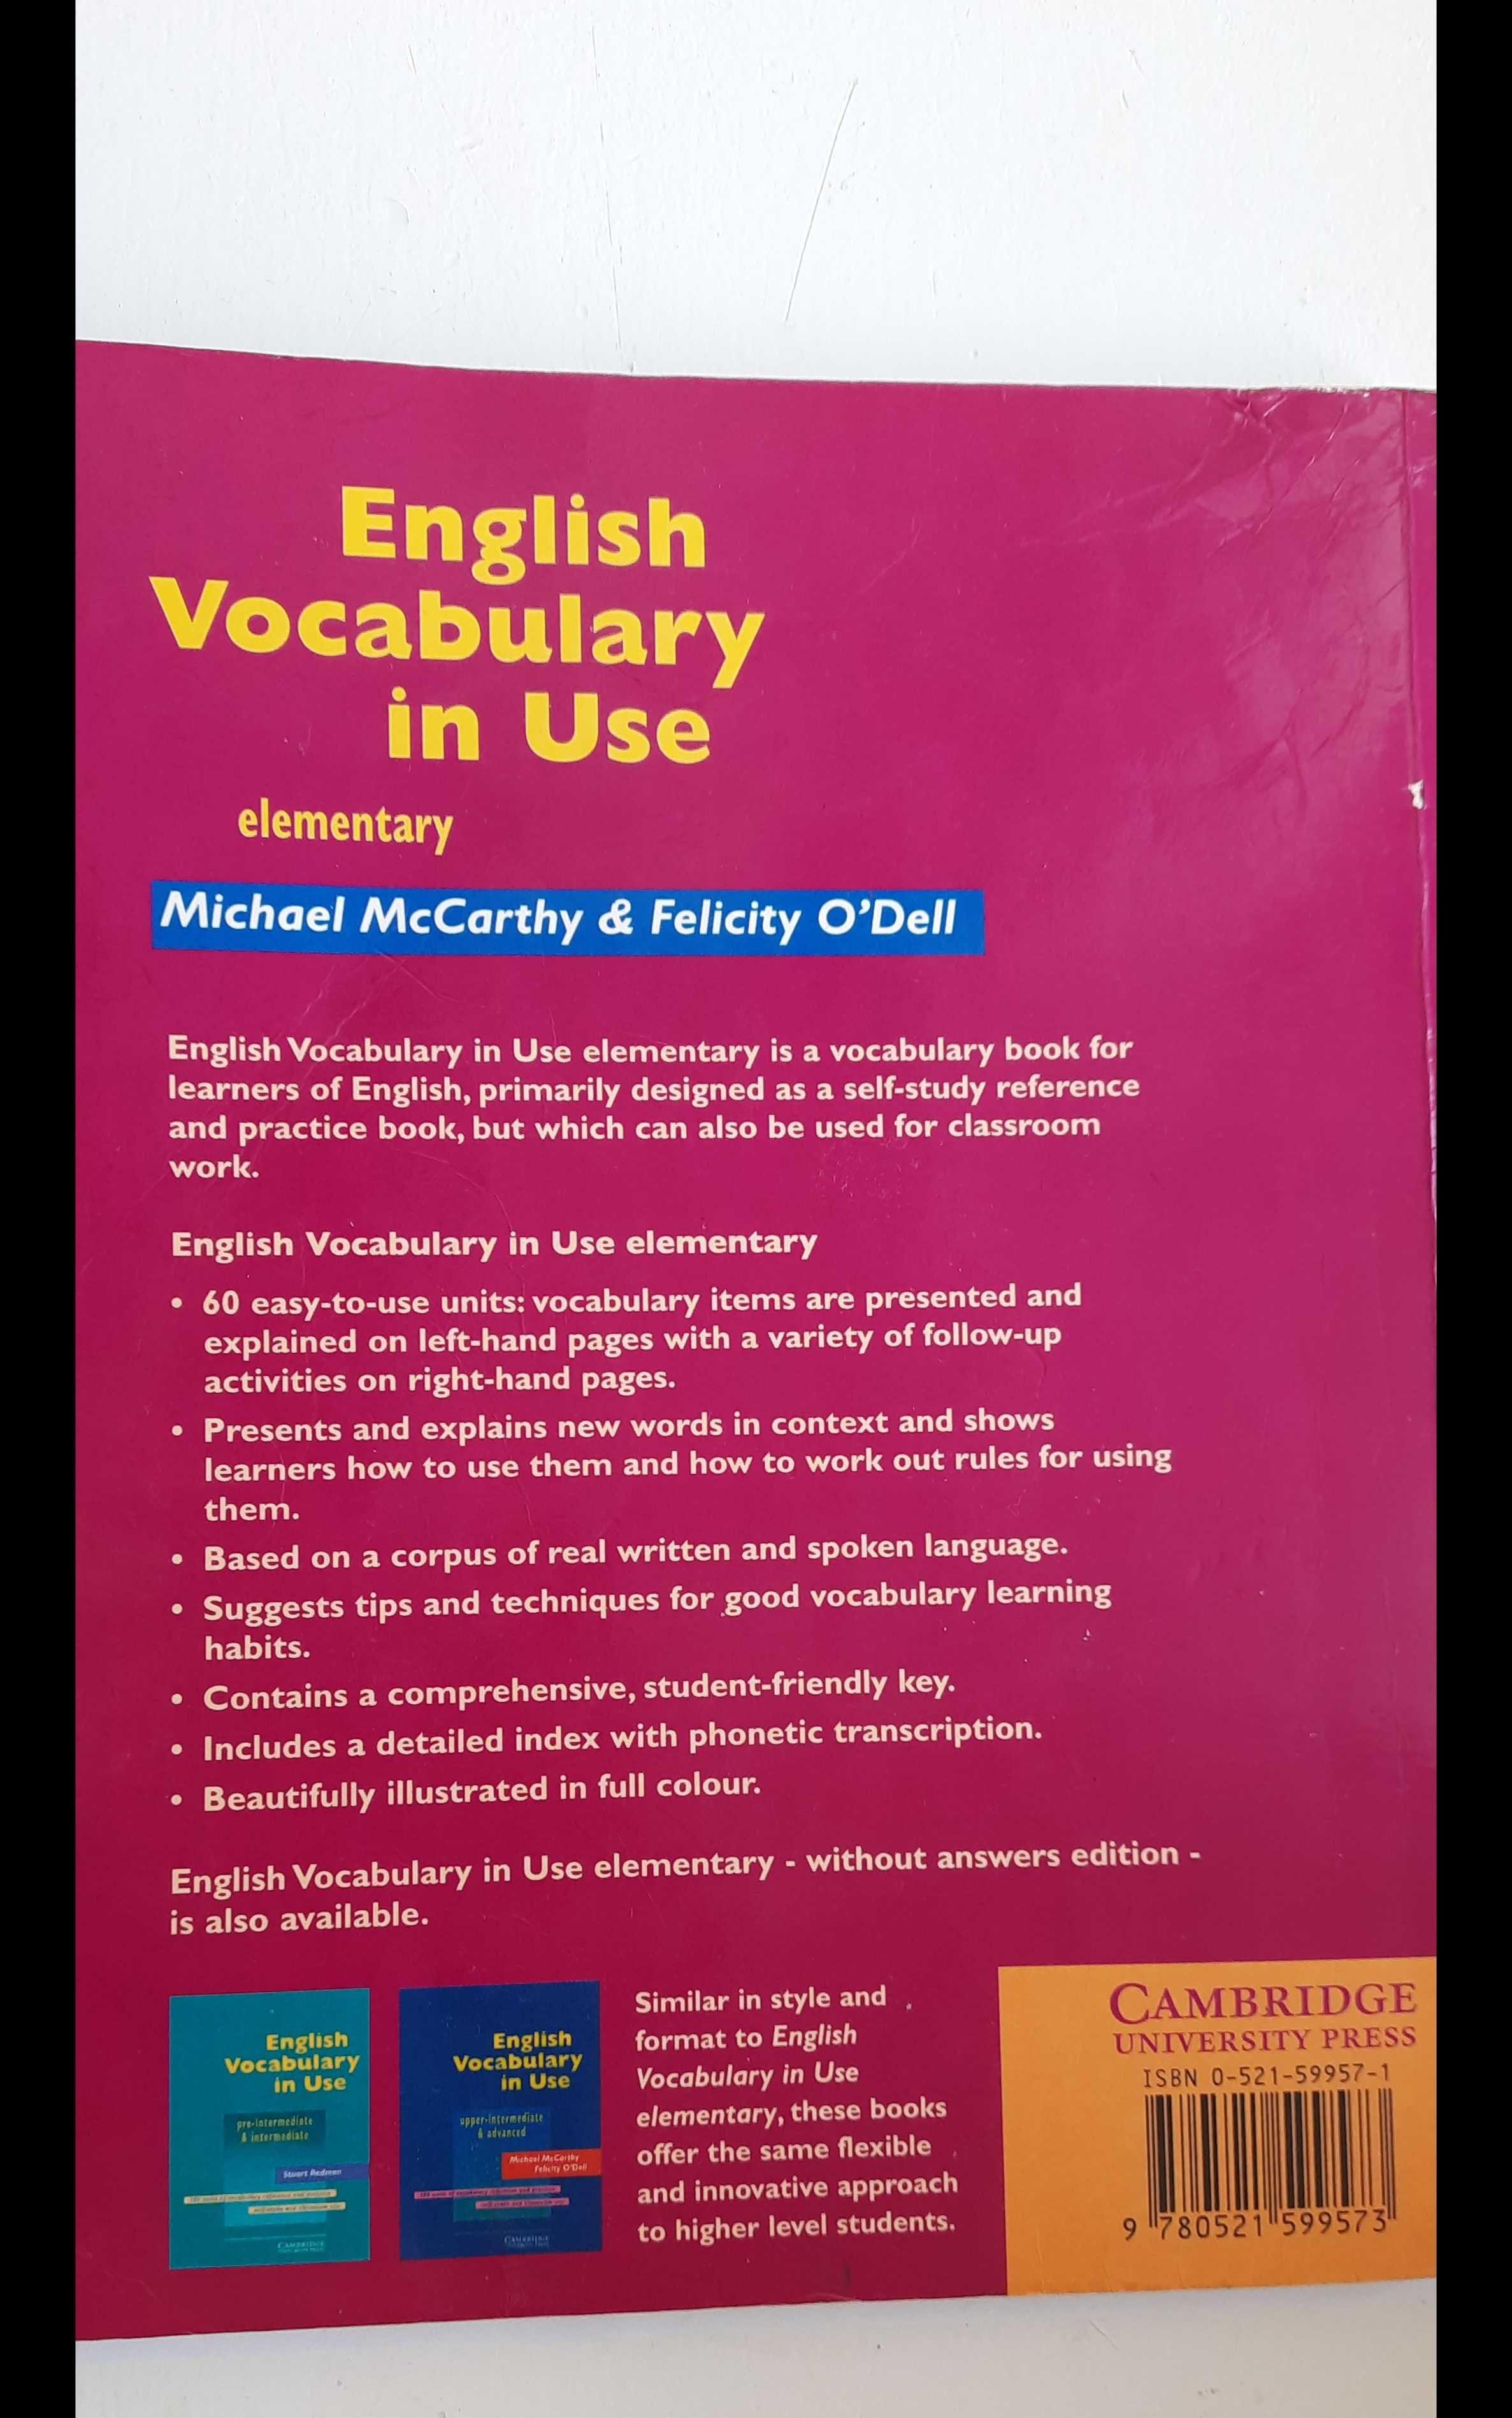 English vocabulary in use elementary. McCarty O'Dell